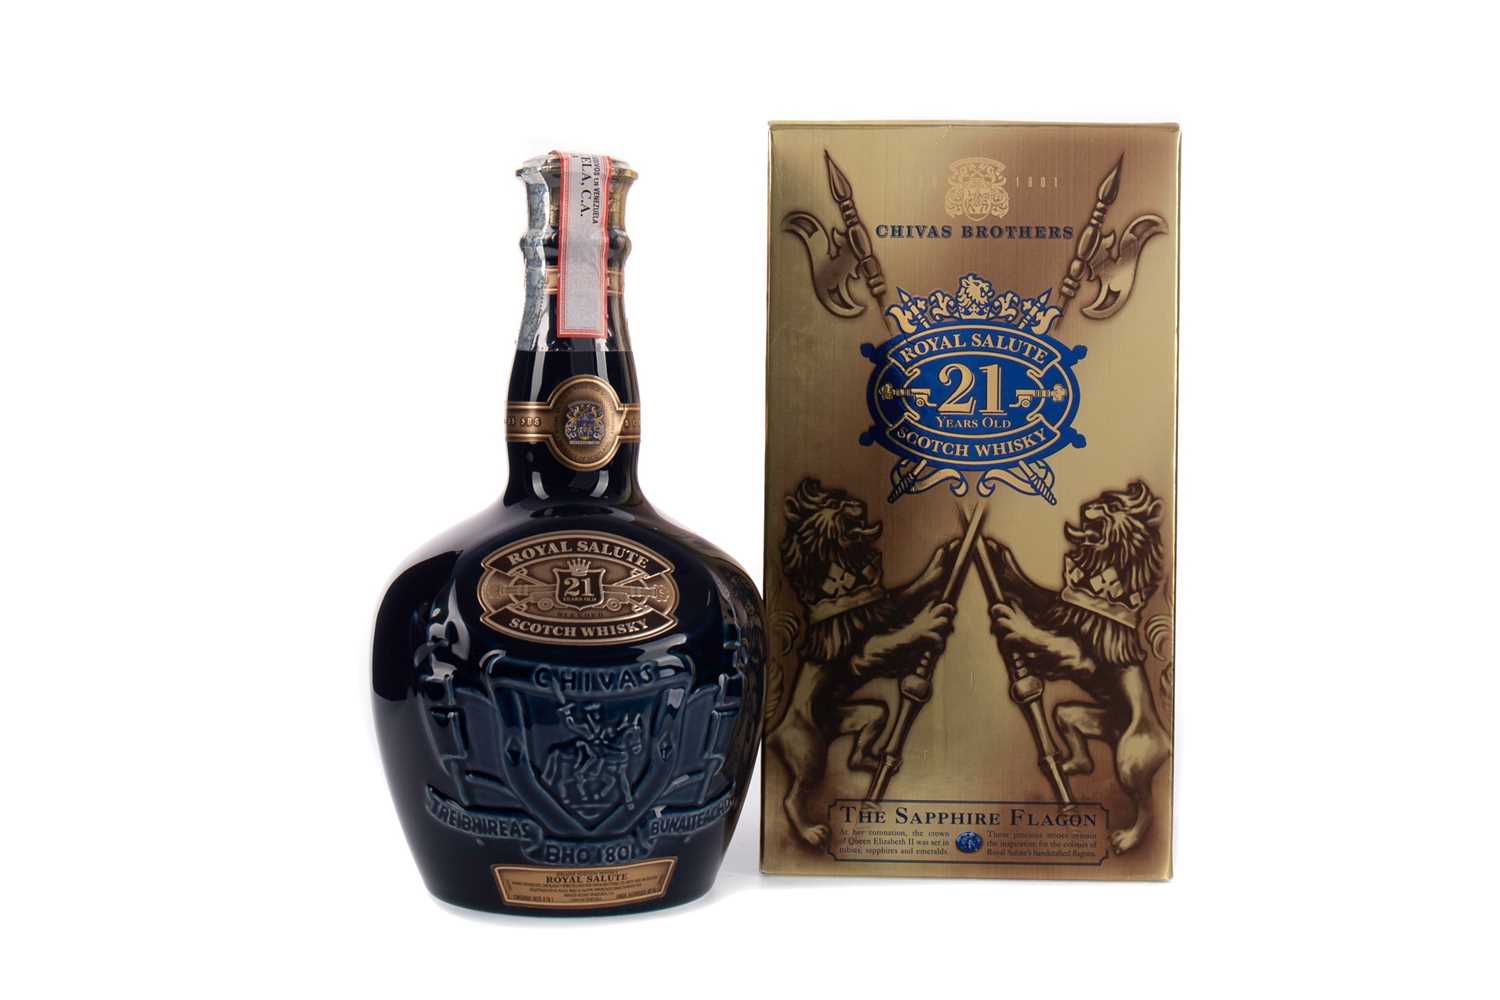 Lot 30 - CHIVAS REGAL ROYAL SALUTE 21 YEARS OLD - SAPPHIRE DECANTER